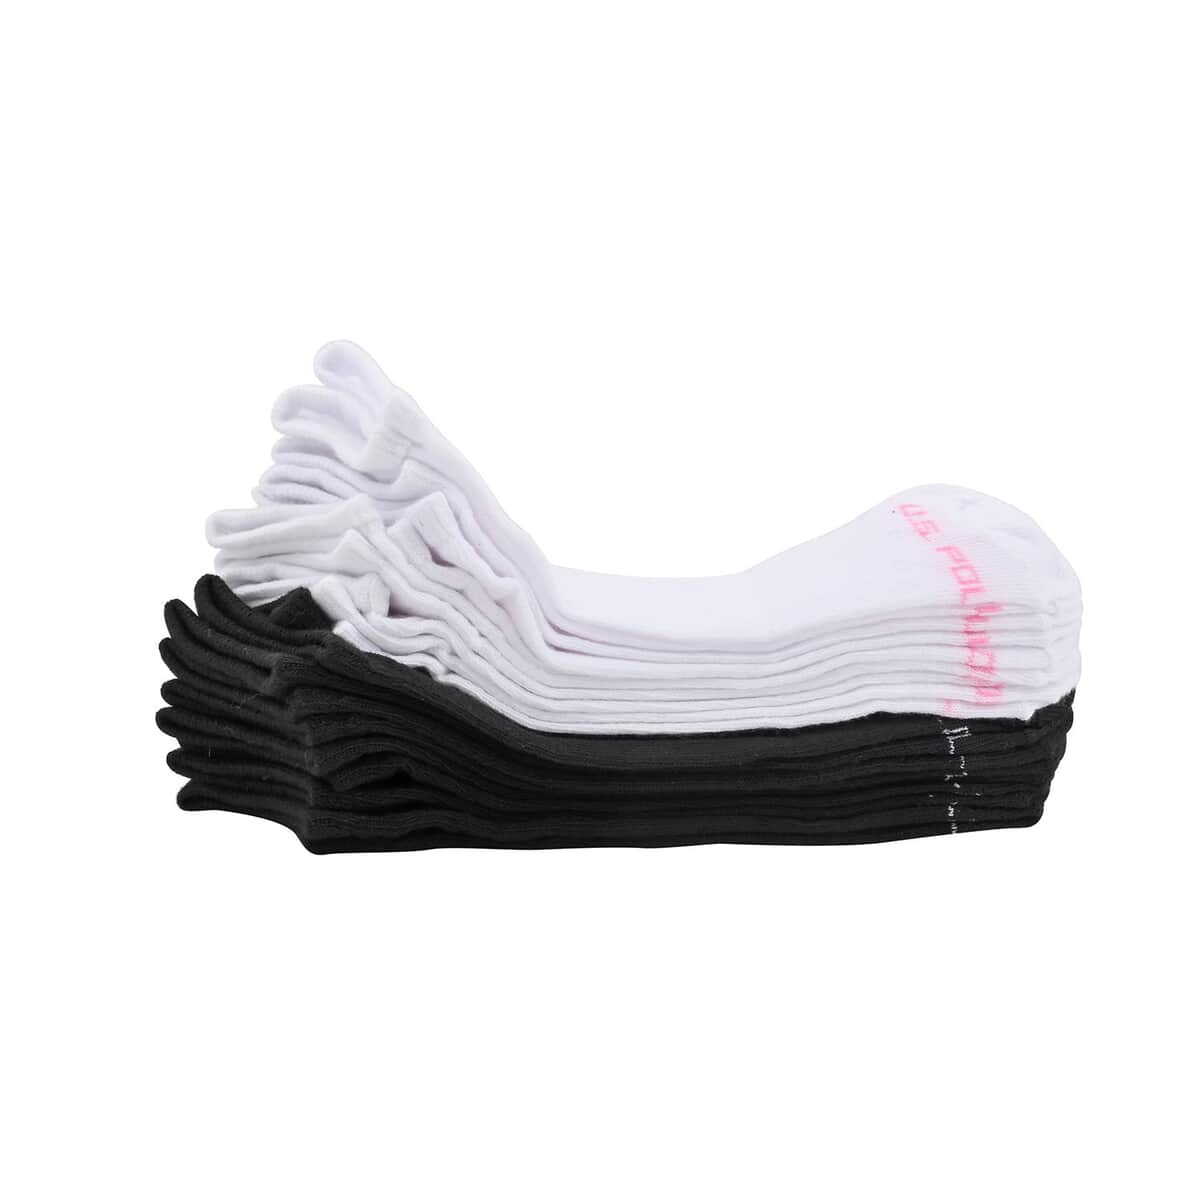 US POLO ASSN 10 Pairs Women's Low Cut Socks (Sizes 4-10) -White-Pink/Black image number 2